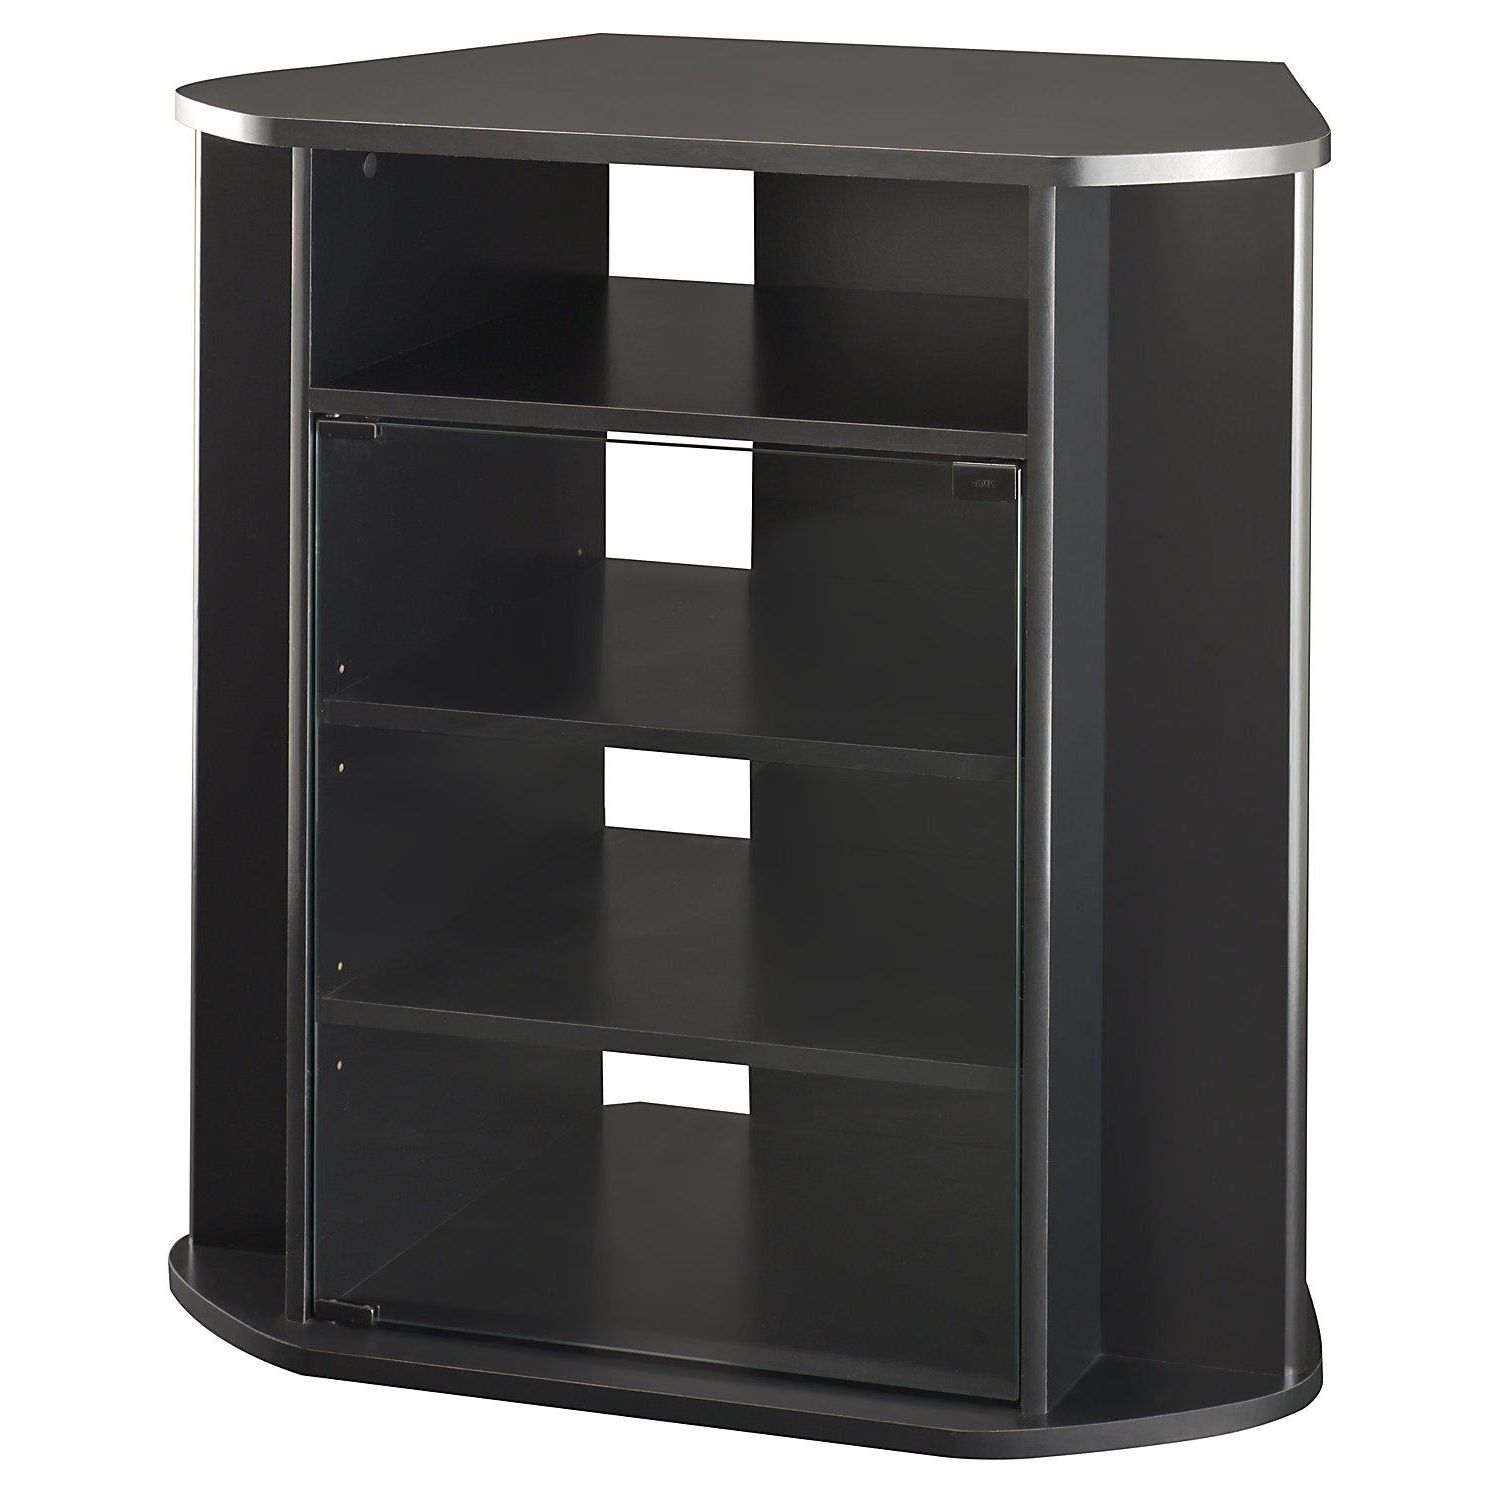 Latest Tall Black Corner Tv Cabinet With Glass Doors And Four Shelves Of In Corner Tv Unit With Glass Doors (View 16 of 20)